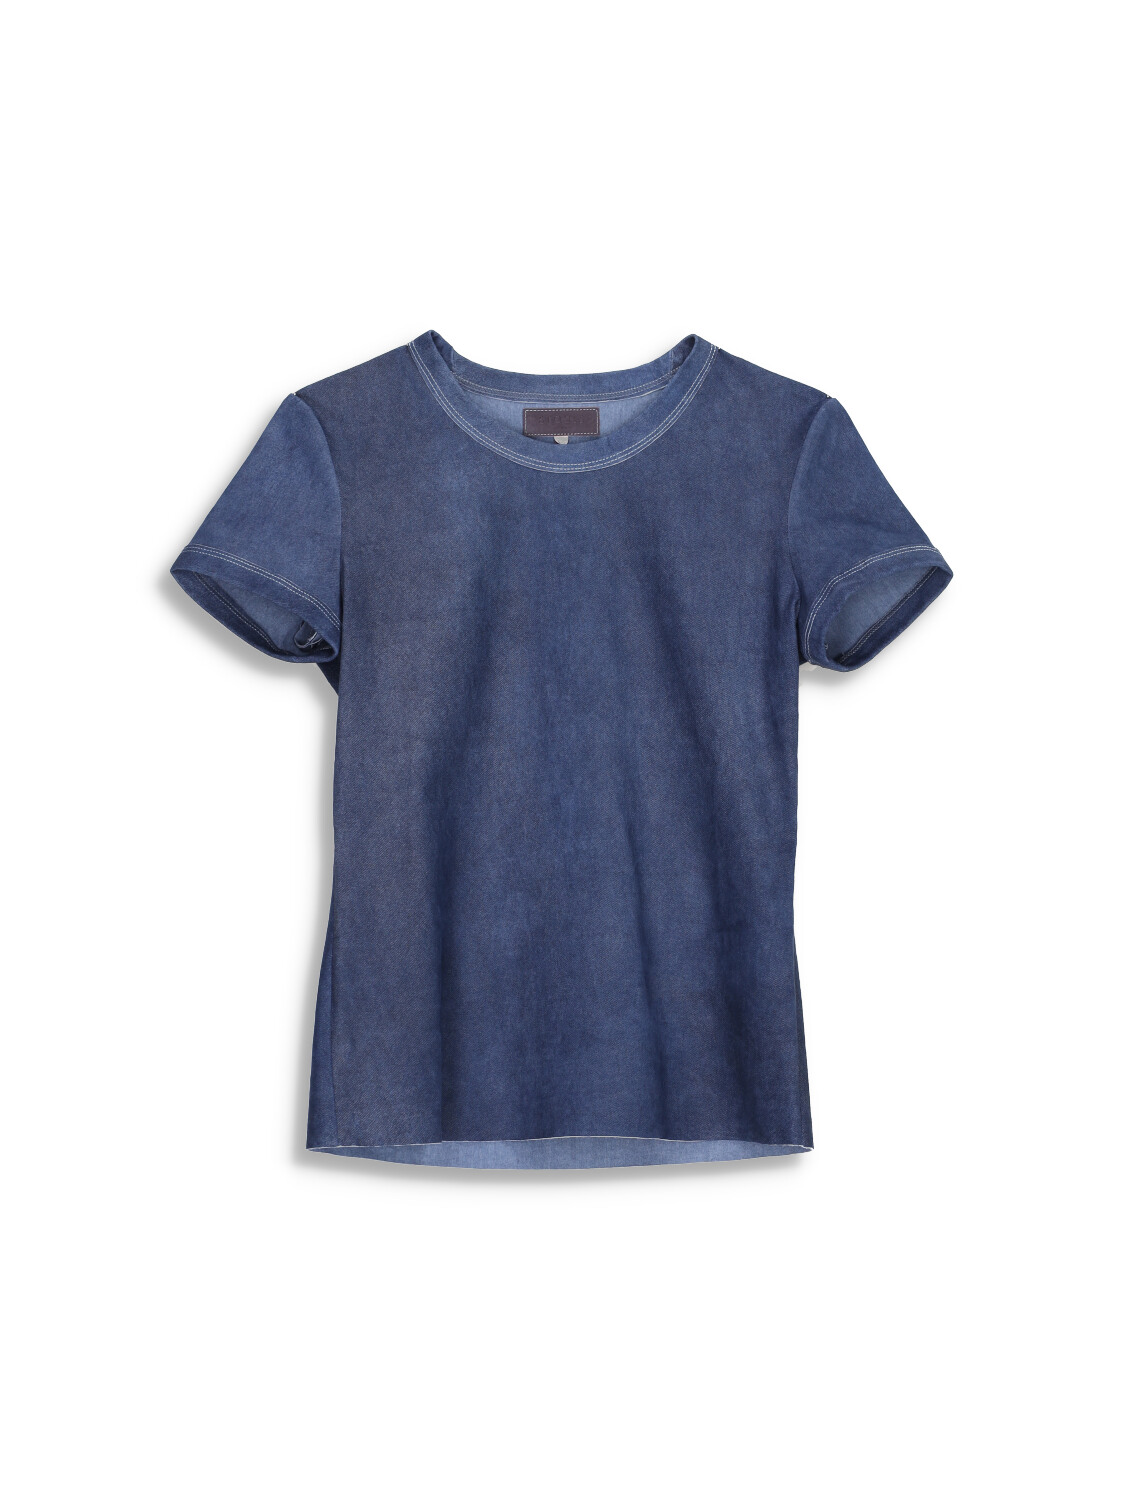 Stouls Stouls 05 - T-shirt in lamb leather  blue M